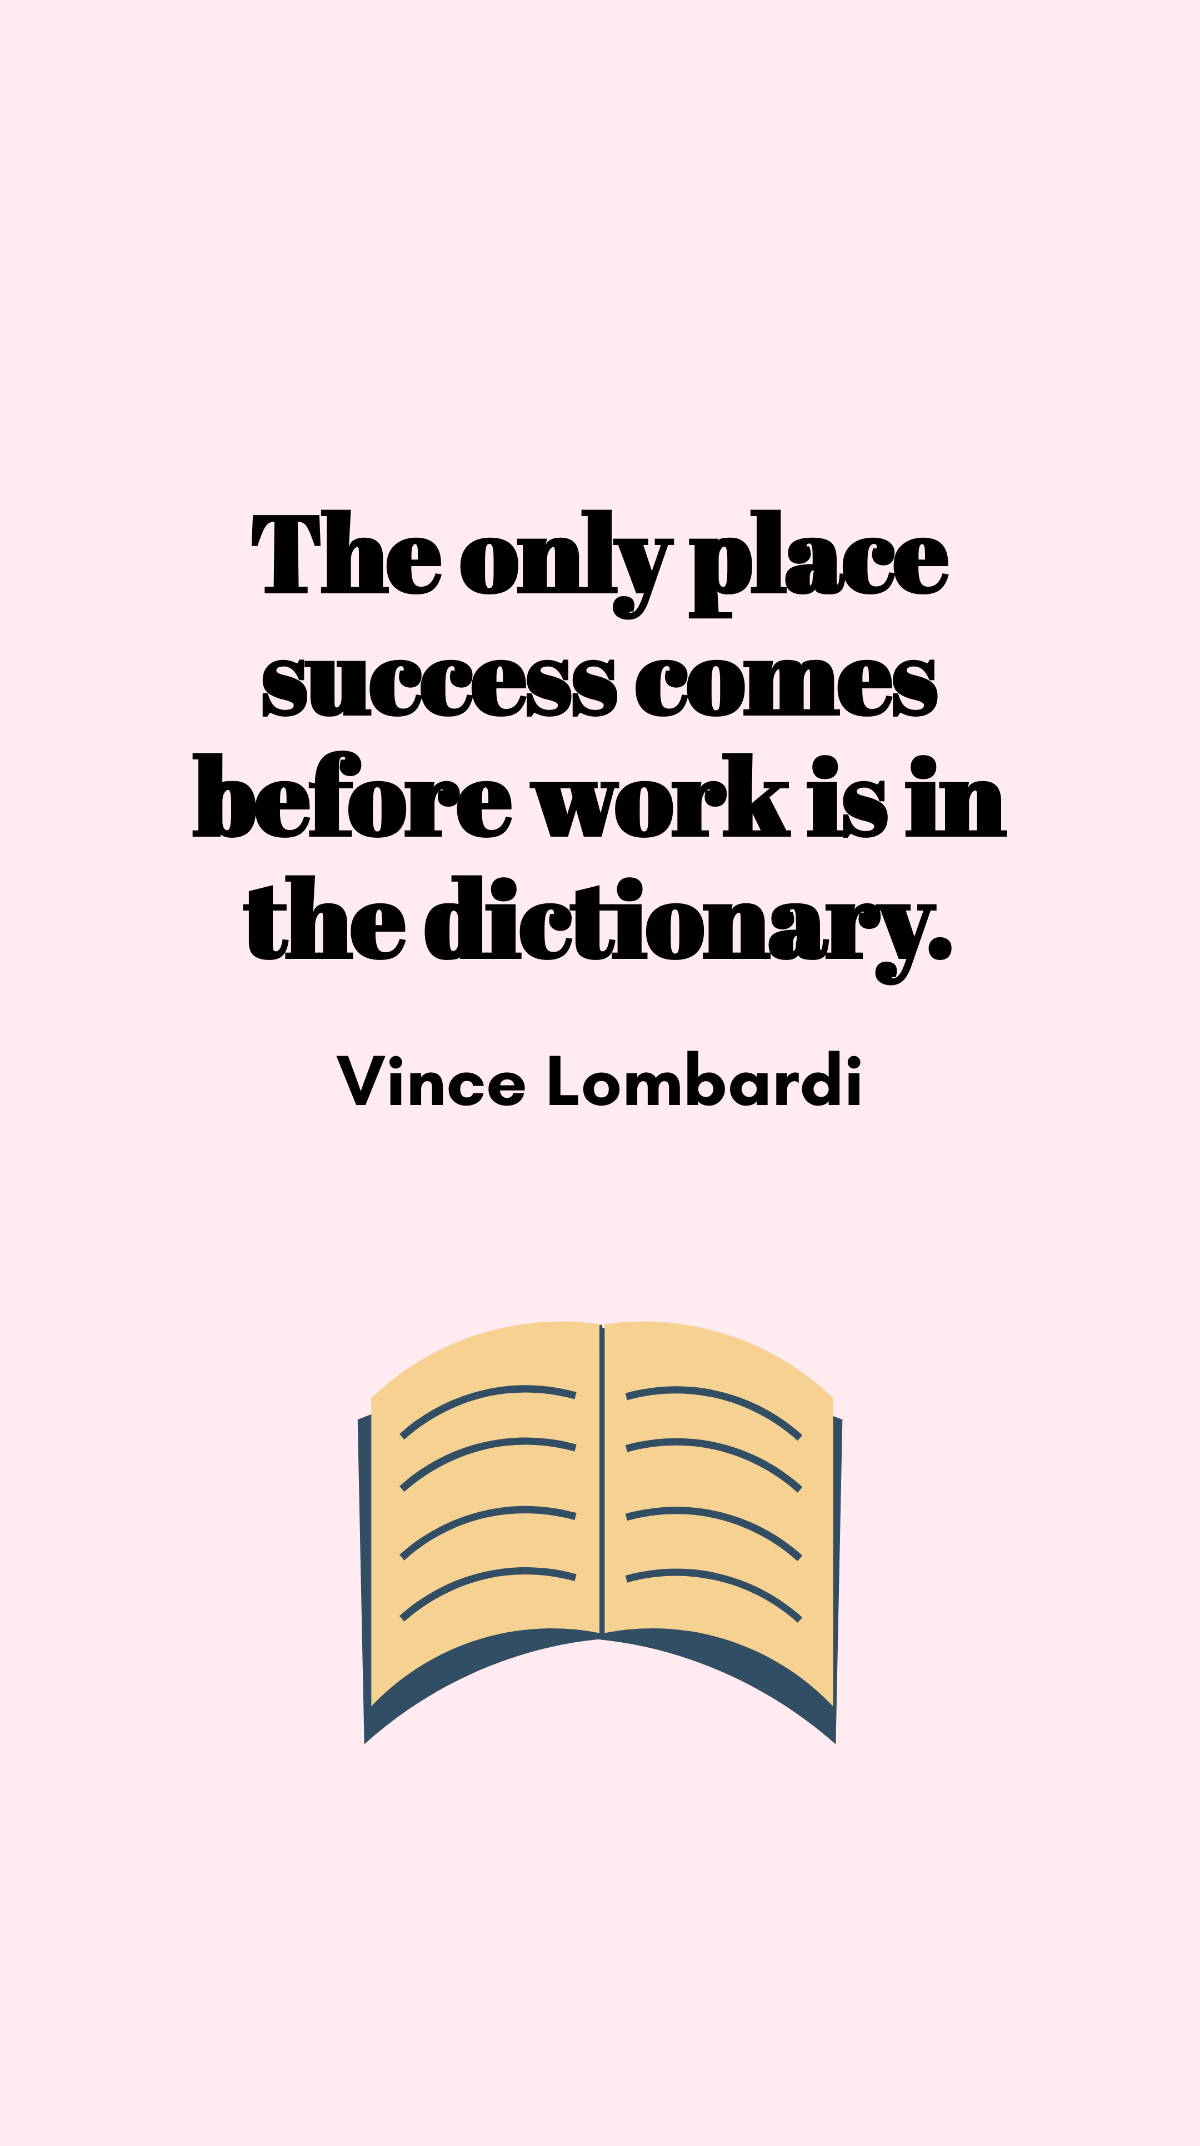 Vince Lombardi - The only place success comes before work is in the dictionary.